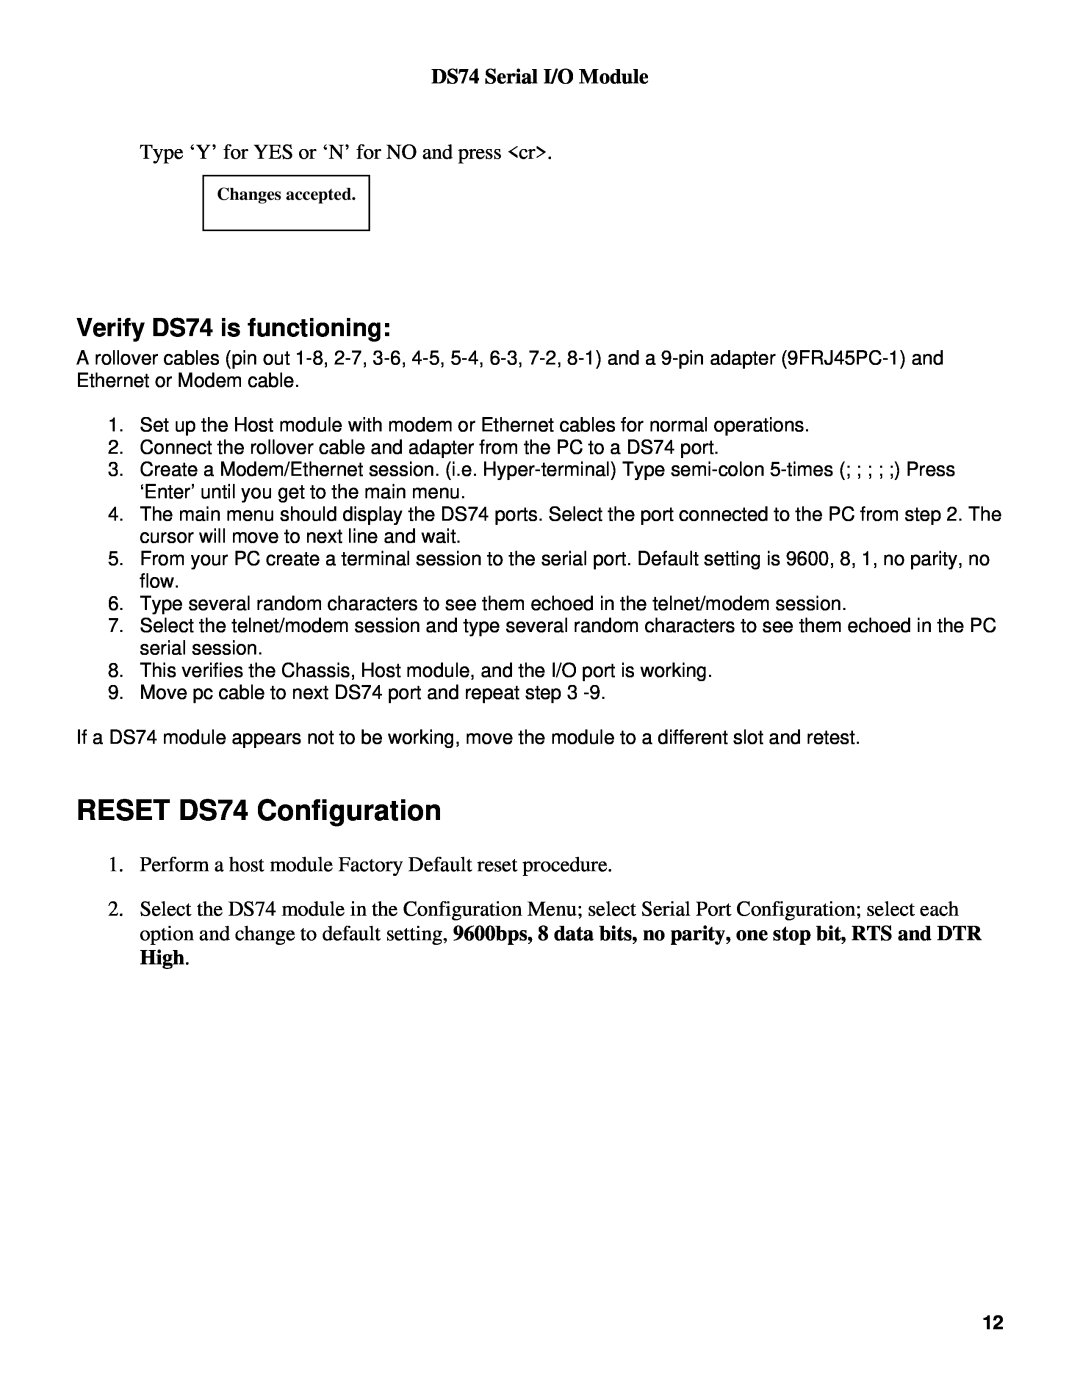 Bay Technical Associates manual RESET DS74 Configuration, Verify DS74 is functioning, DS74 Serial I/O Module 